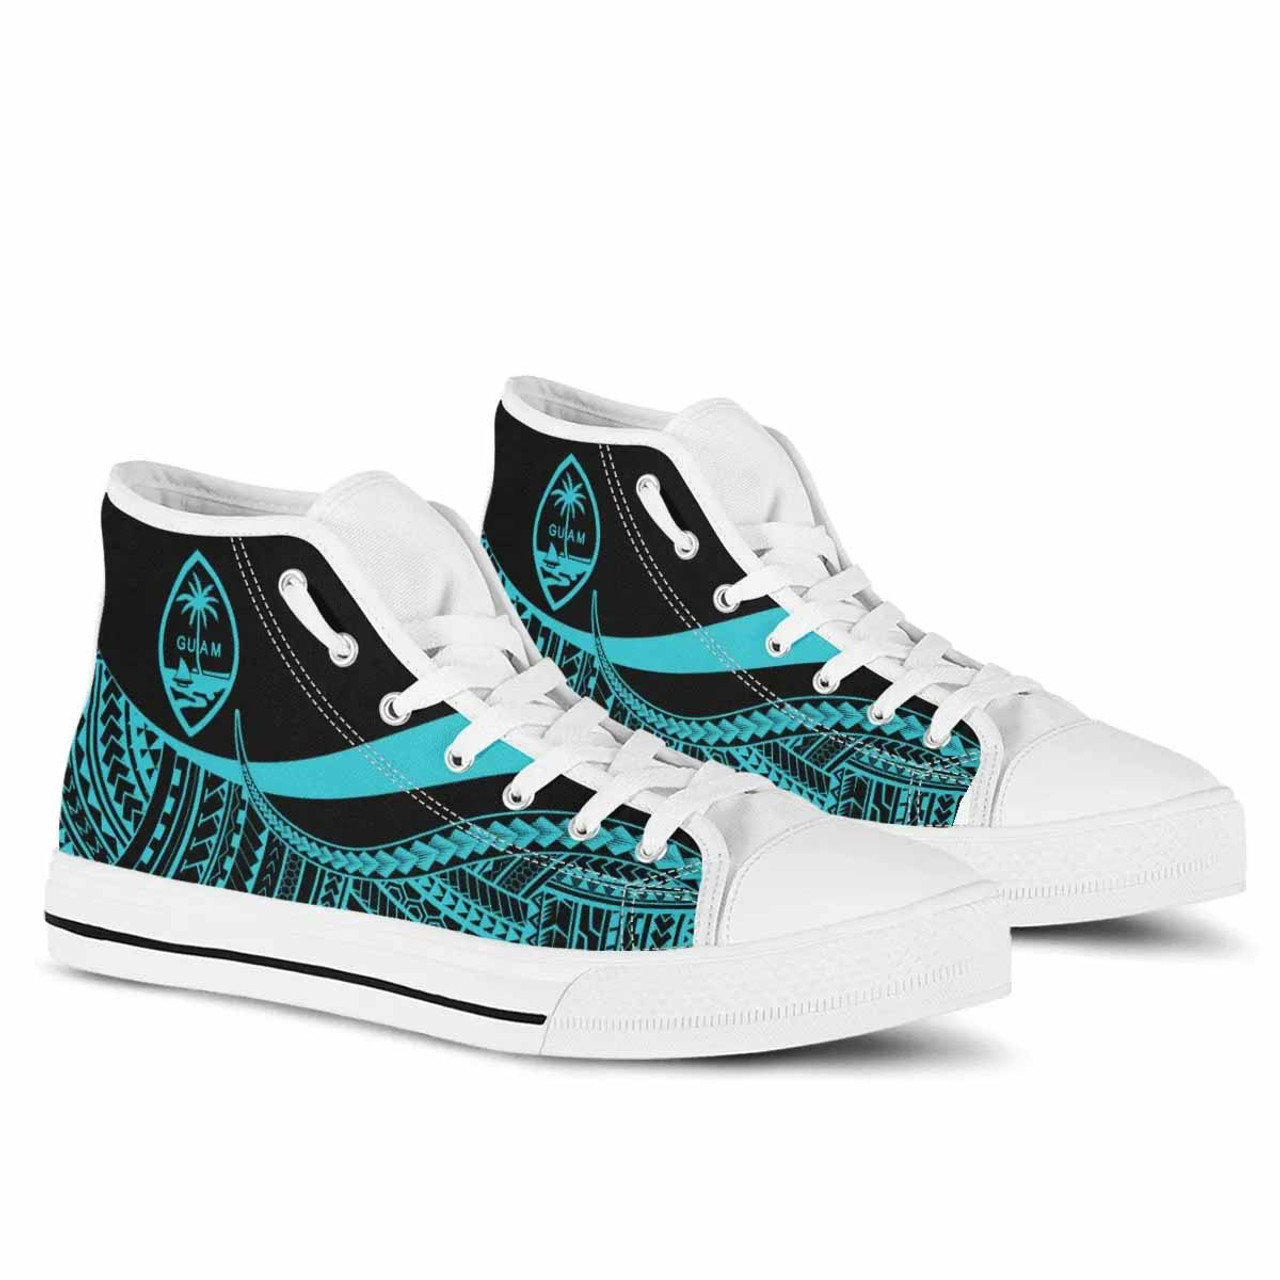 Guam High Top Shoes Turquoise - Polynesian Tentacle Tribal Pattern 6